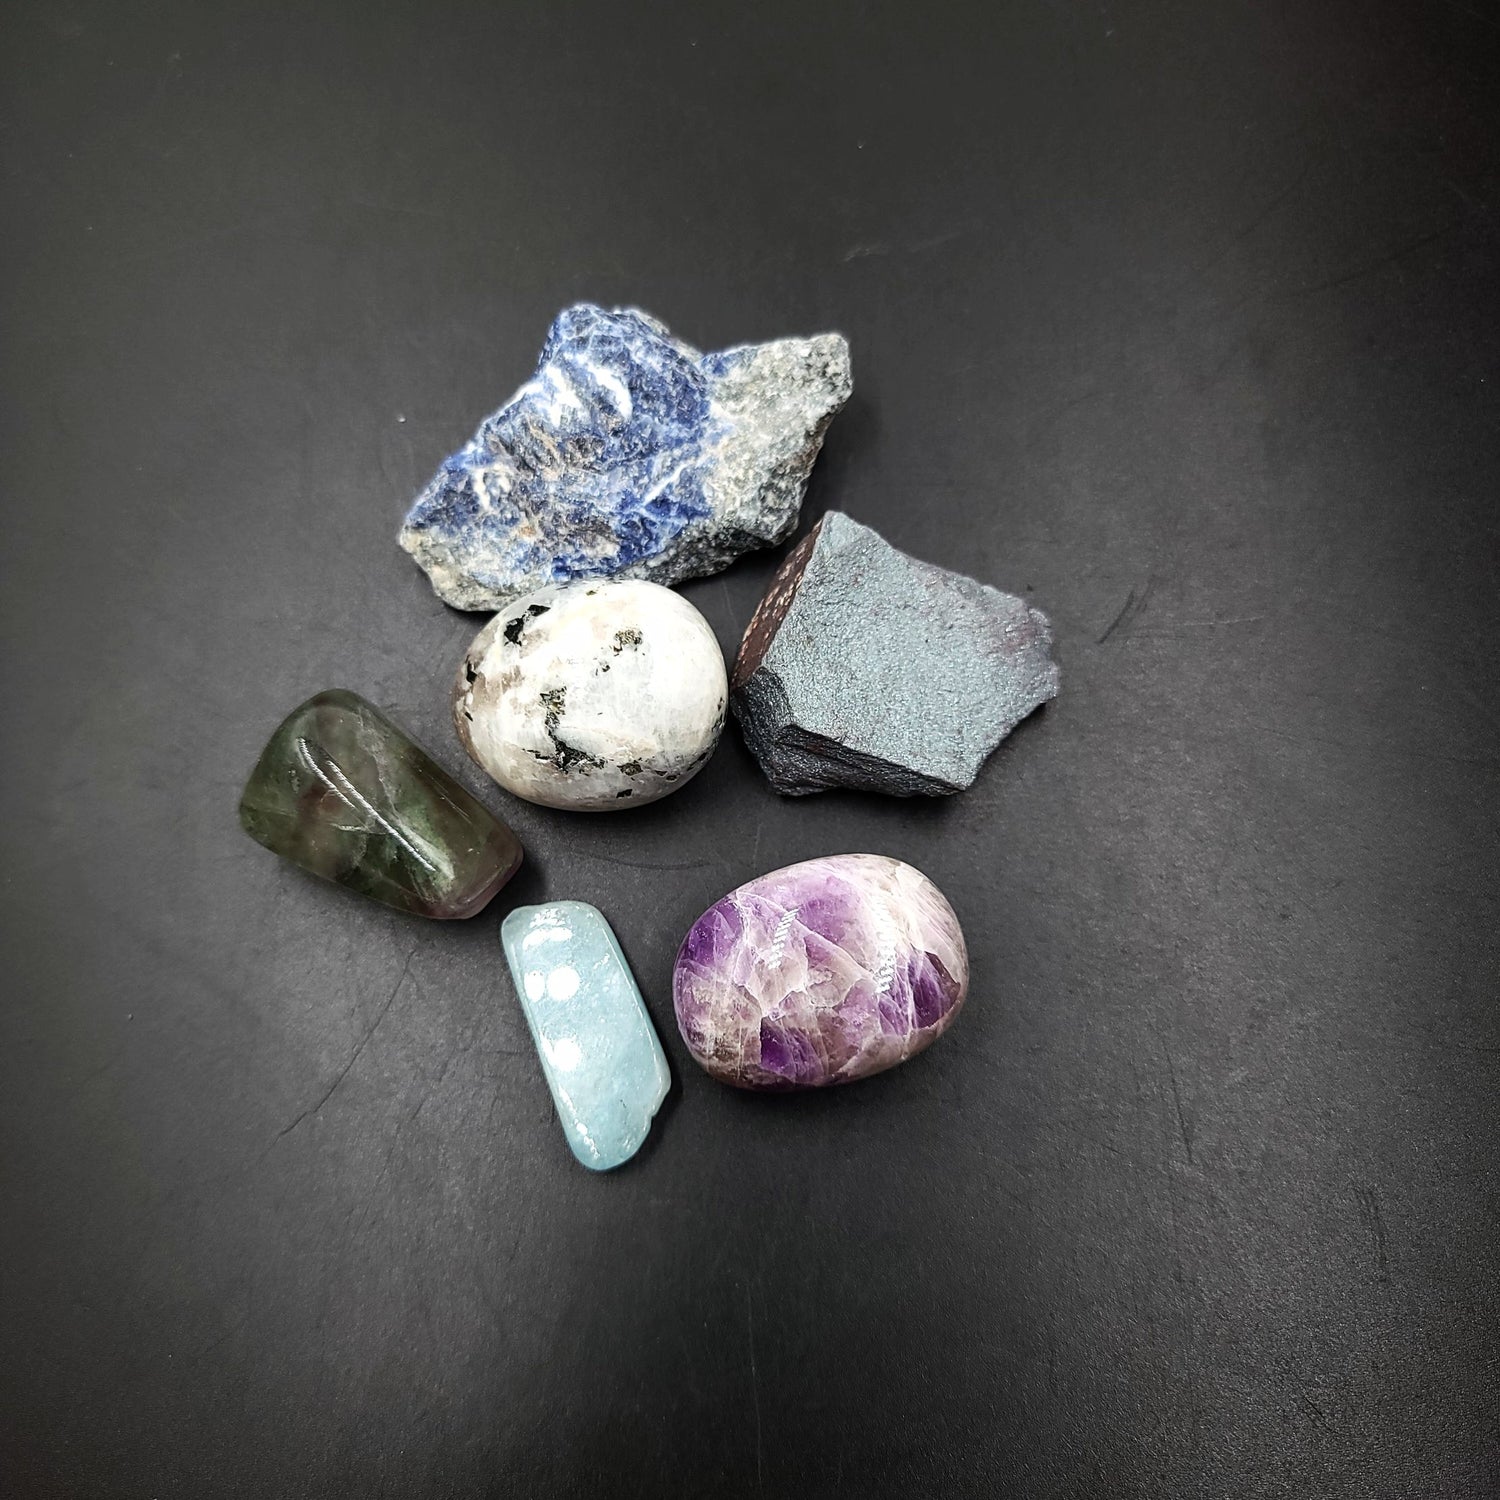 You Can Do Anything, But Not Everything - Stress Relief Stone Set - Elevated Metaphysical